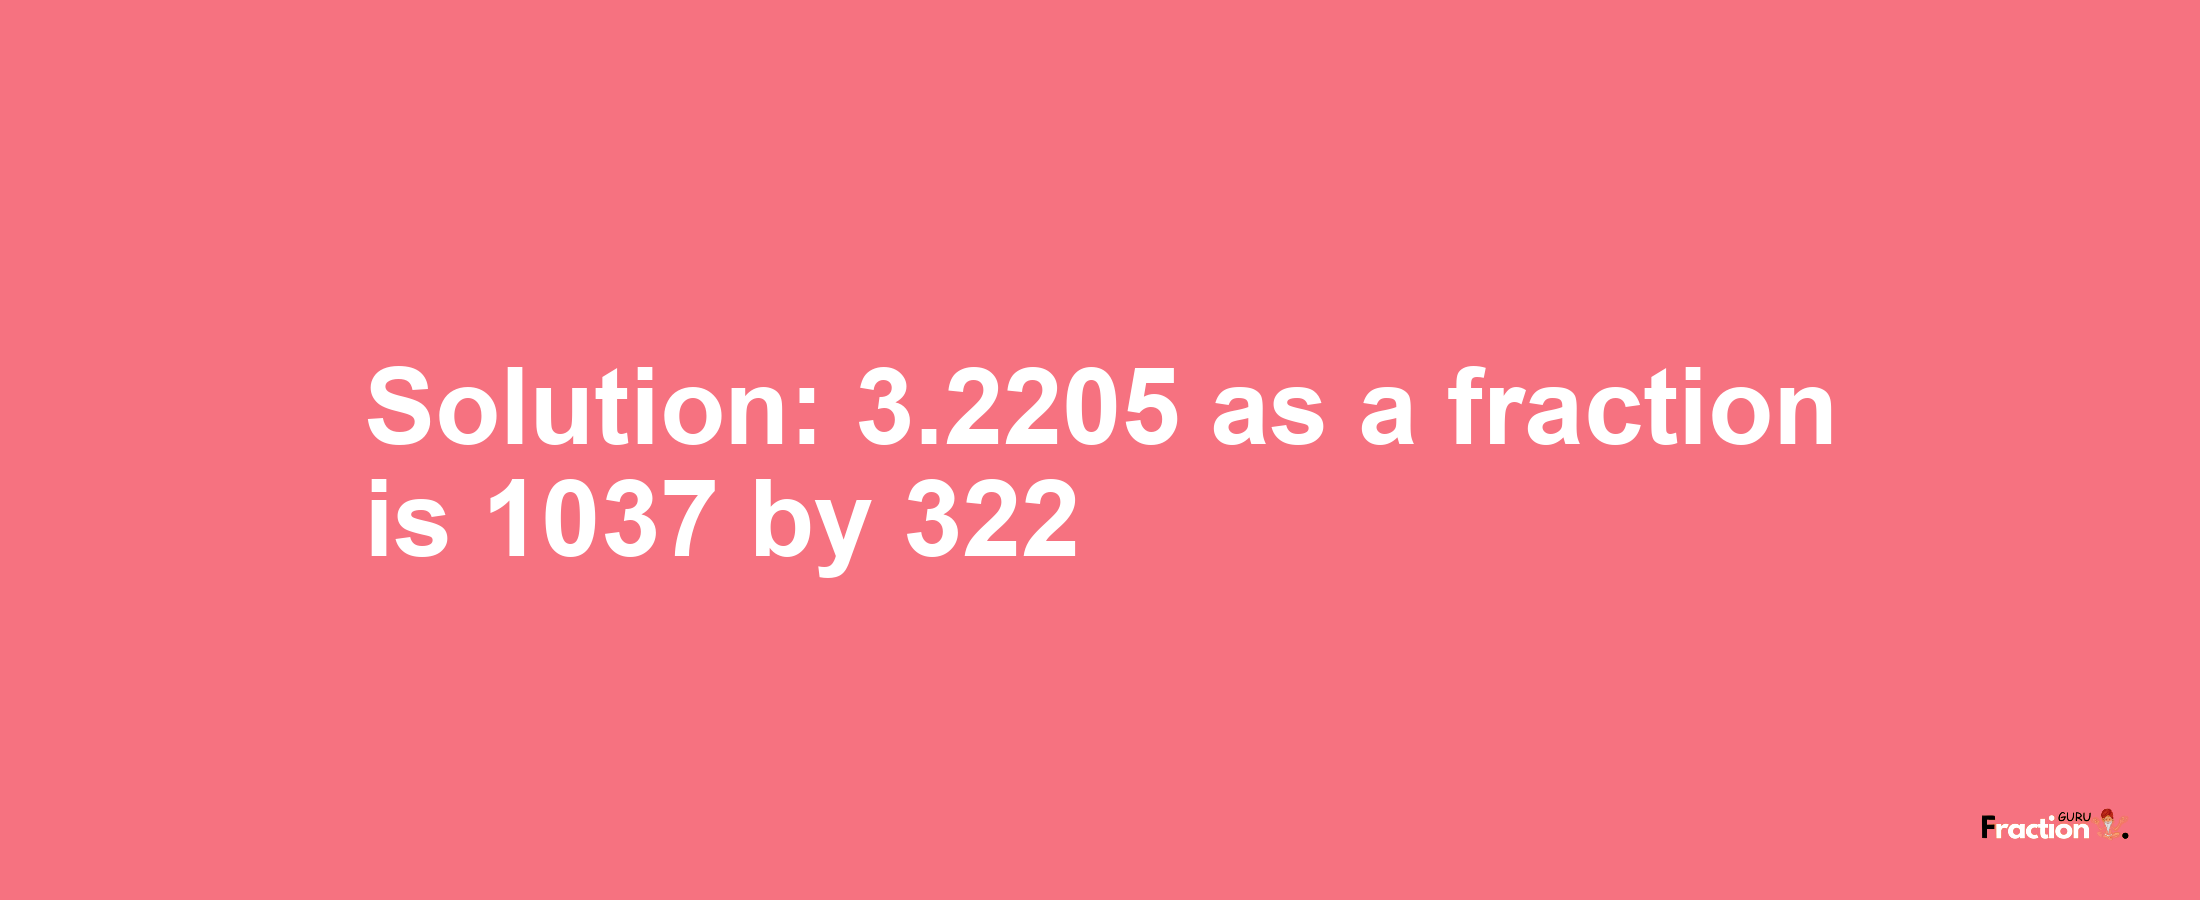 Solution:3.2205 as a fraction is 1037/322